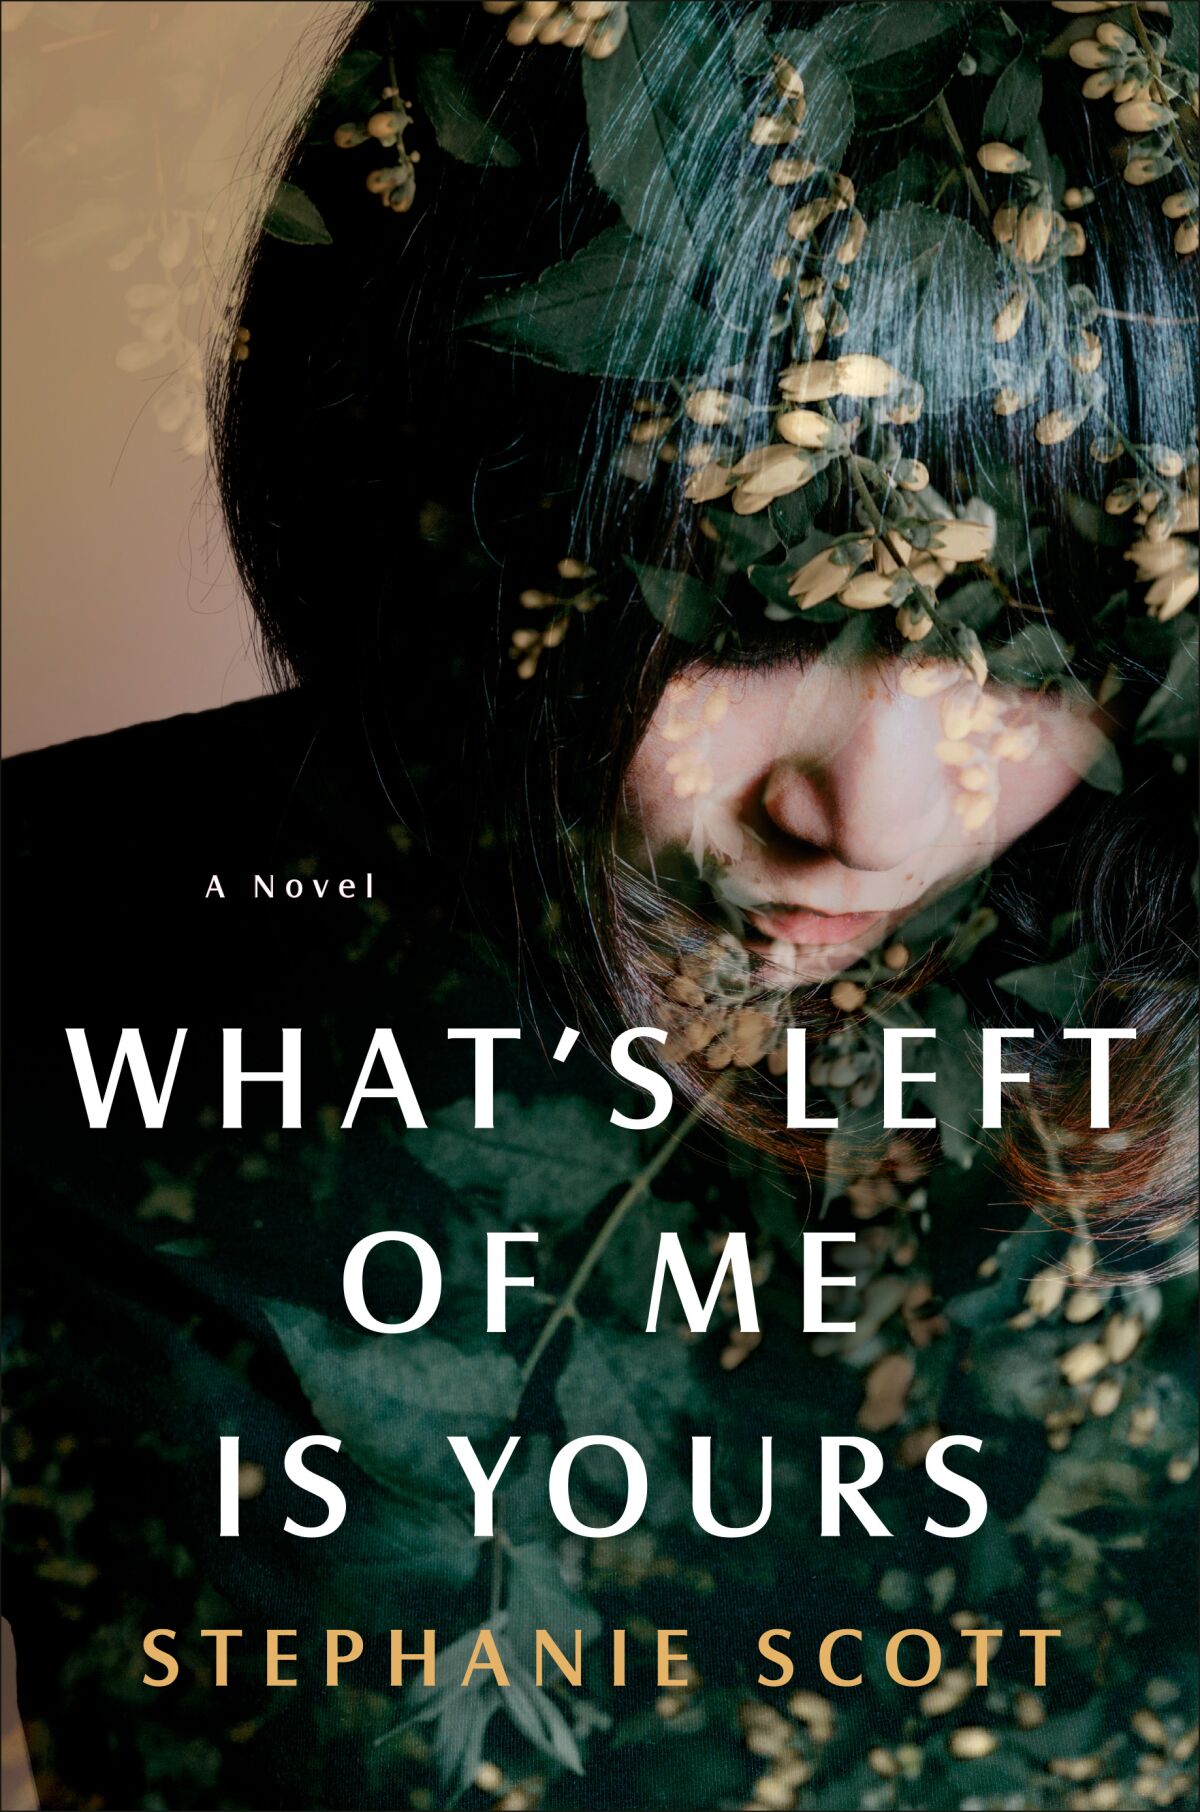 A book jacket for Stephanie Scott's "What's Left of Me is Yours."